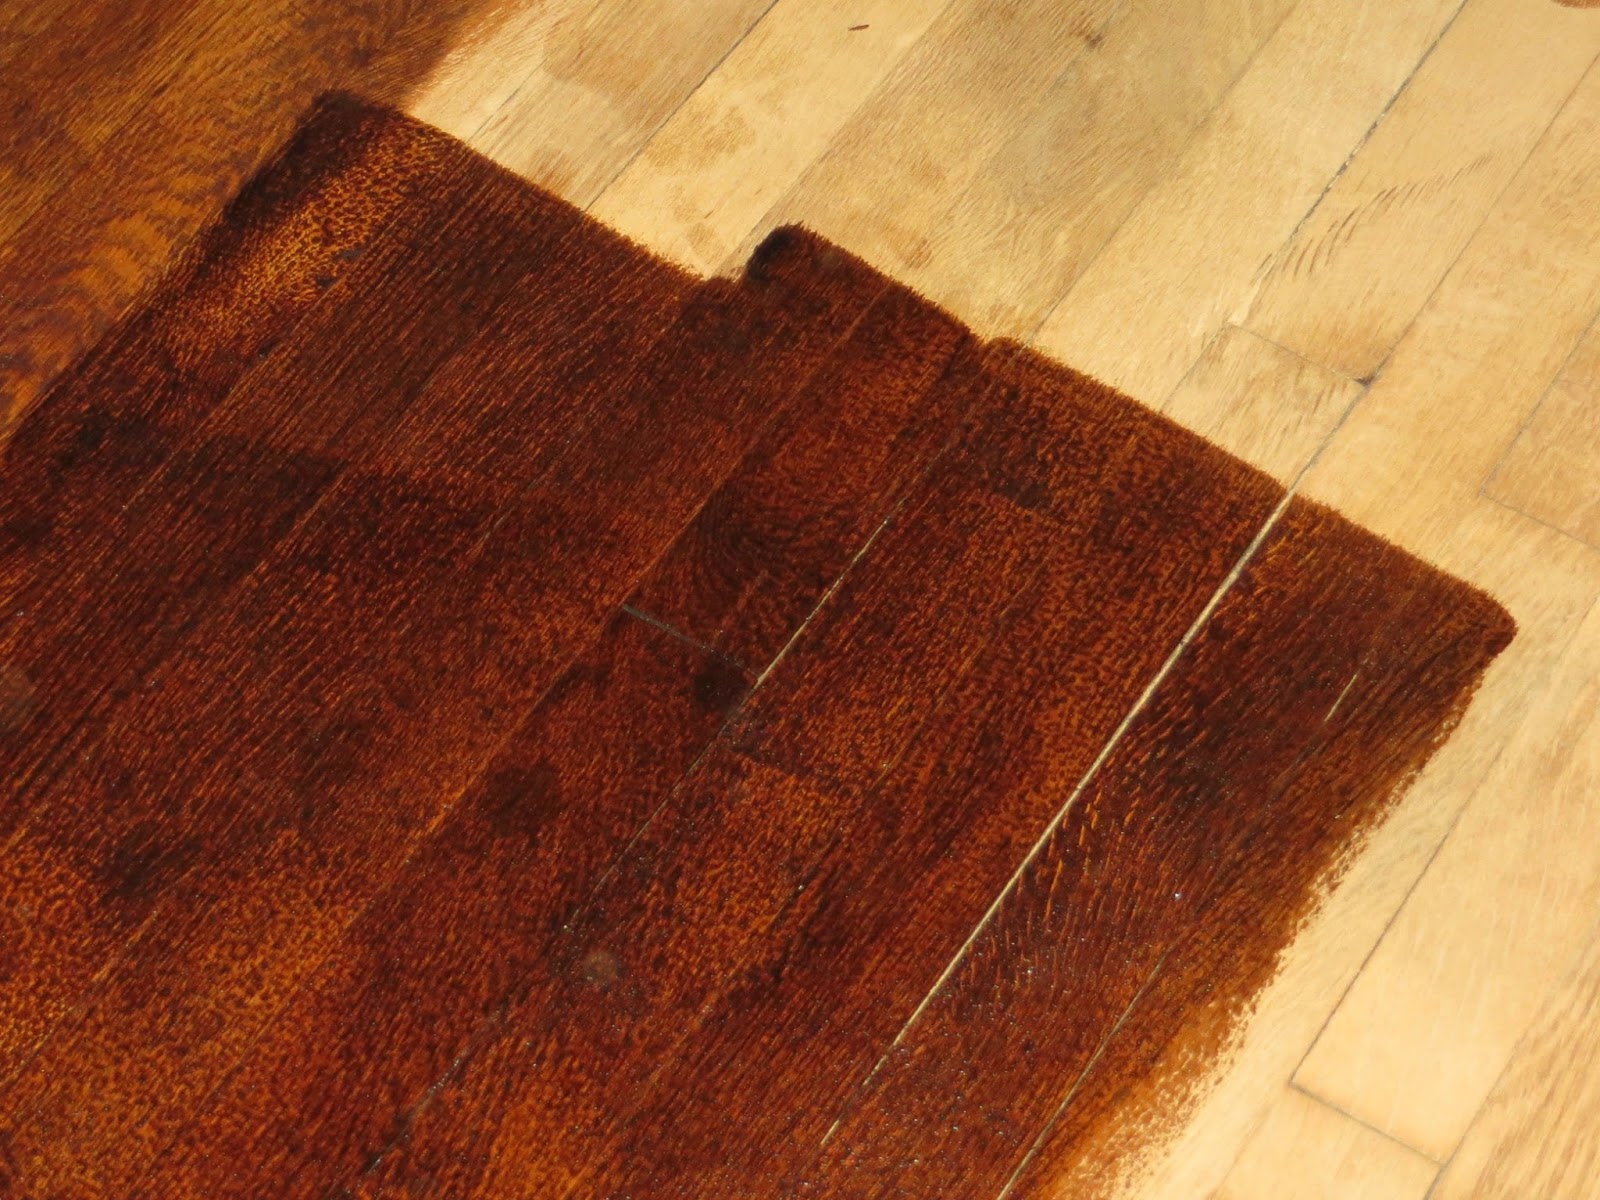 How to Stain Hardwood Floors - Through the Eyes of the Mrs.